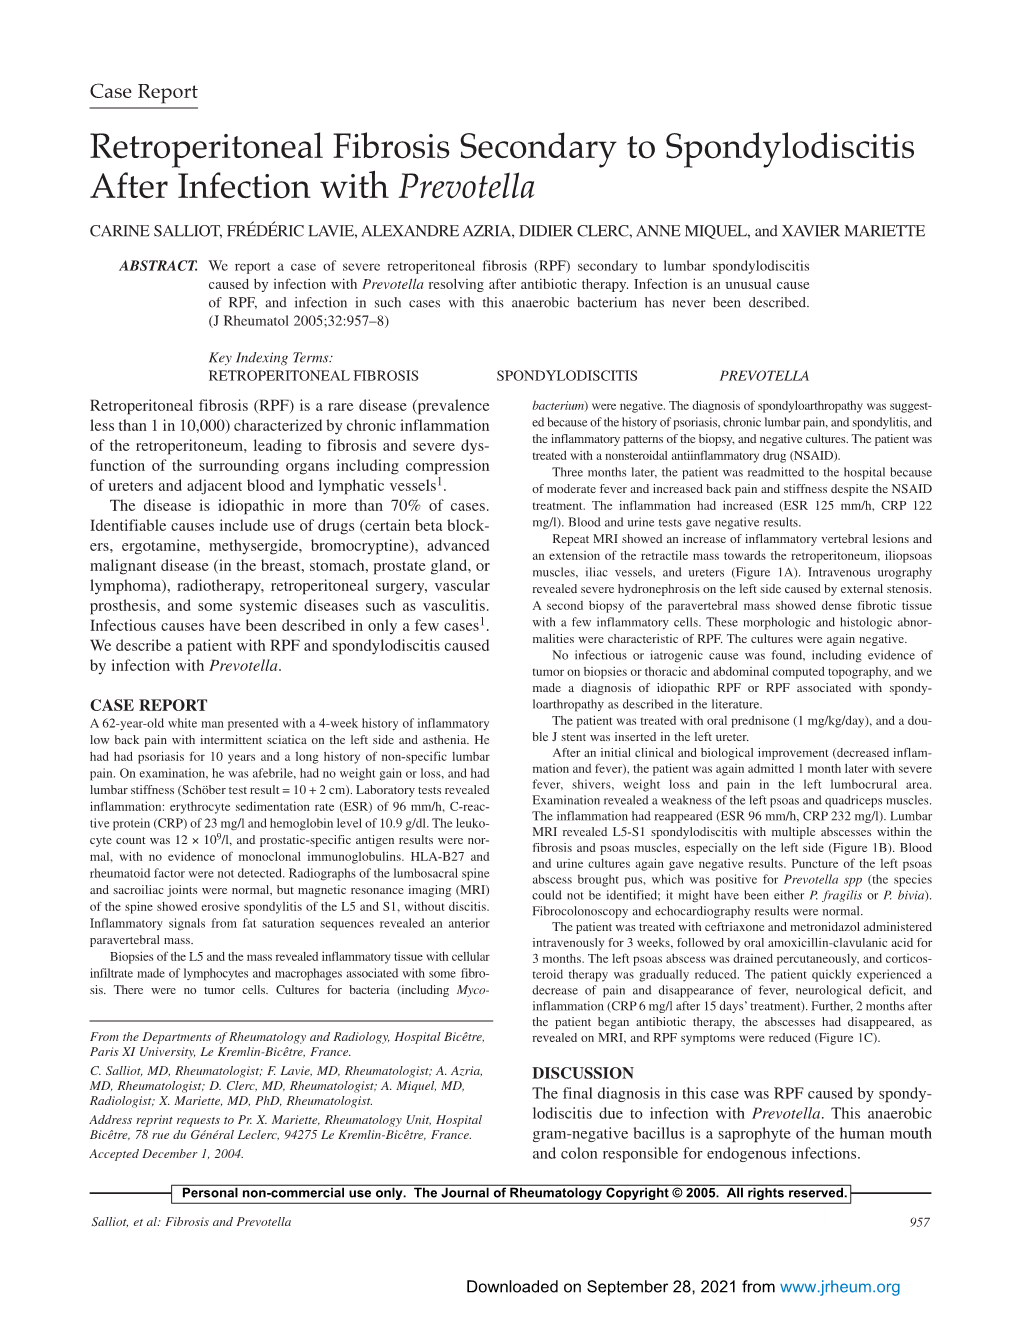 Retroperitoneal Fibrosis Secondary to Spondylodiscitis After Infection With